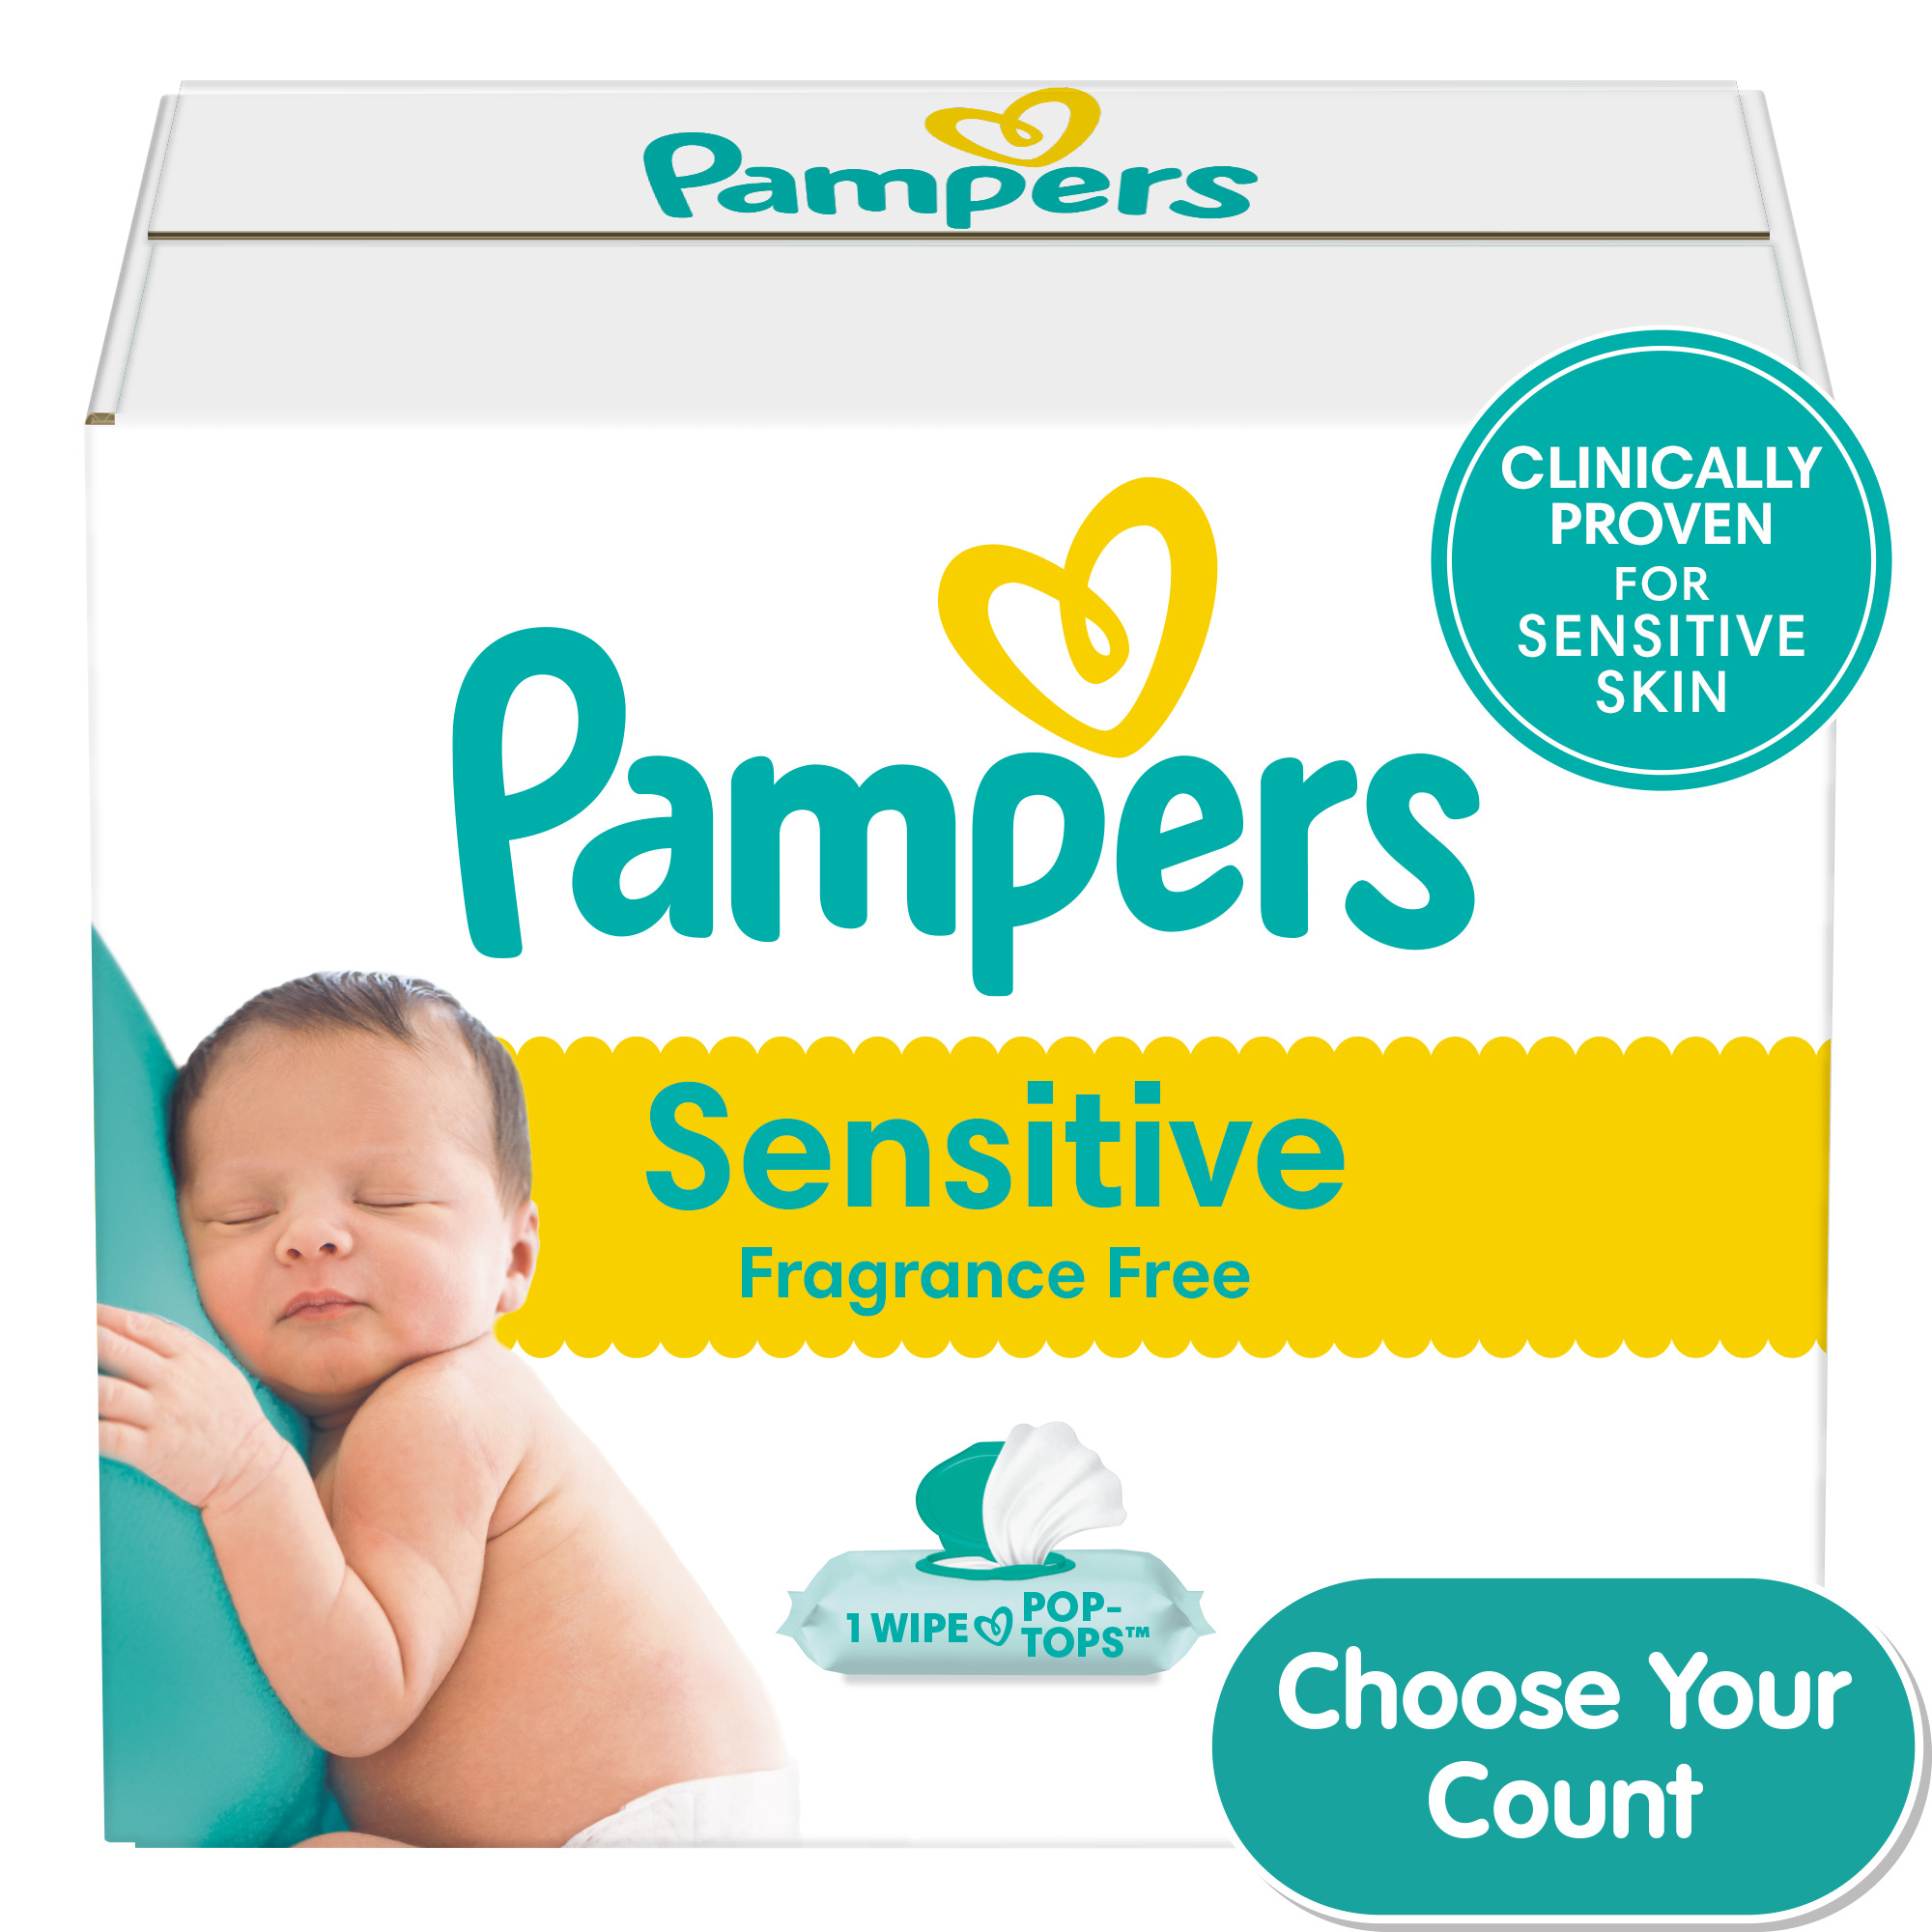 Pampers Baby Wipes Sensitive Perfume Free 8X Refill Packs (Tub Not Included) 576 Count - image 1 of 14